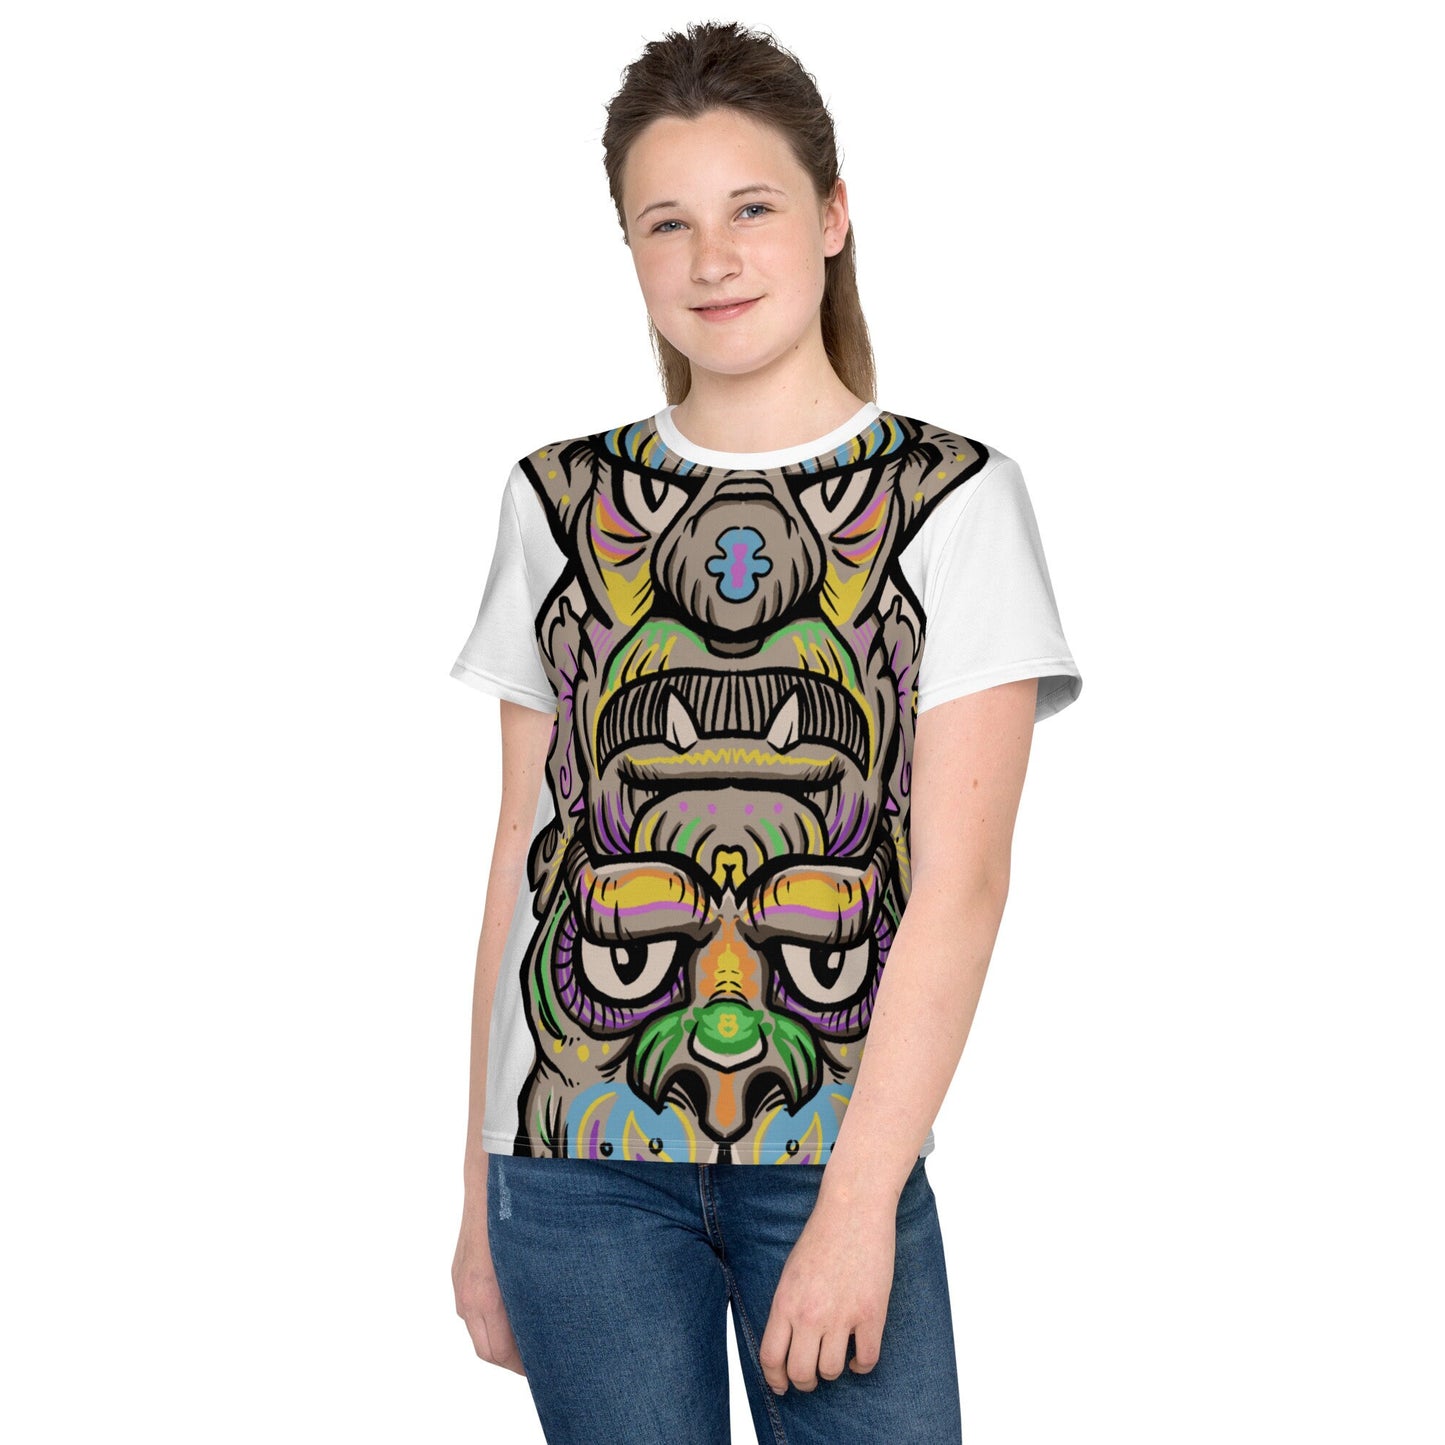 Totem - Youth crew neck t-shirt